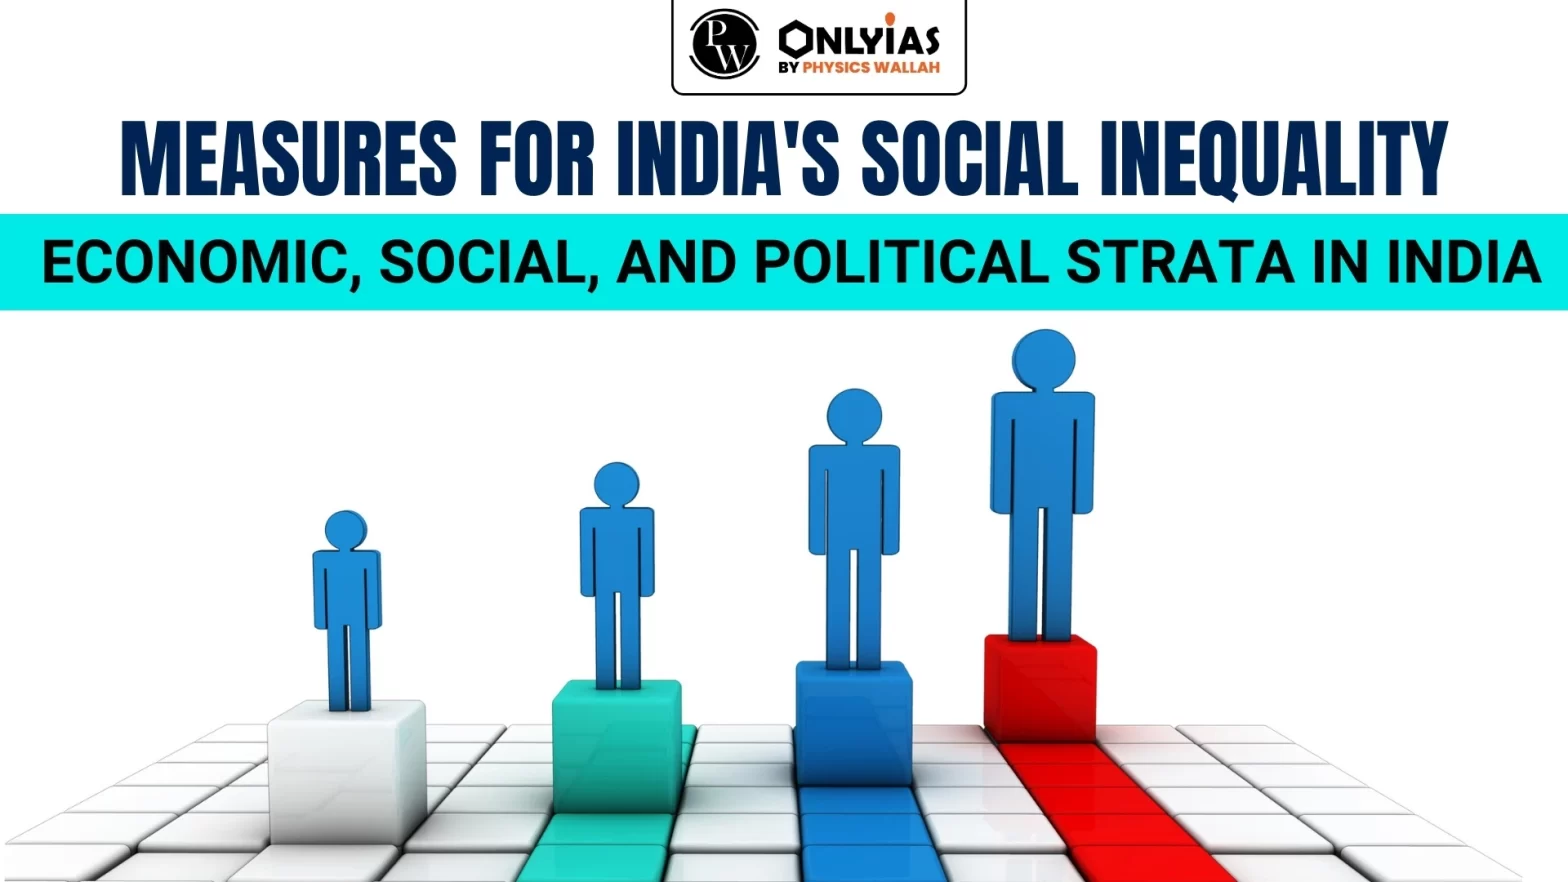 Measures for India’s Social Inequality: Economic, Social, and Political Strata in India